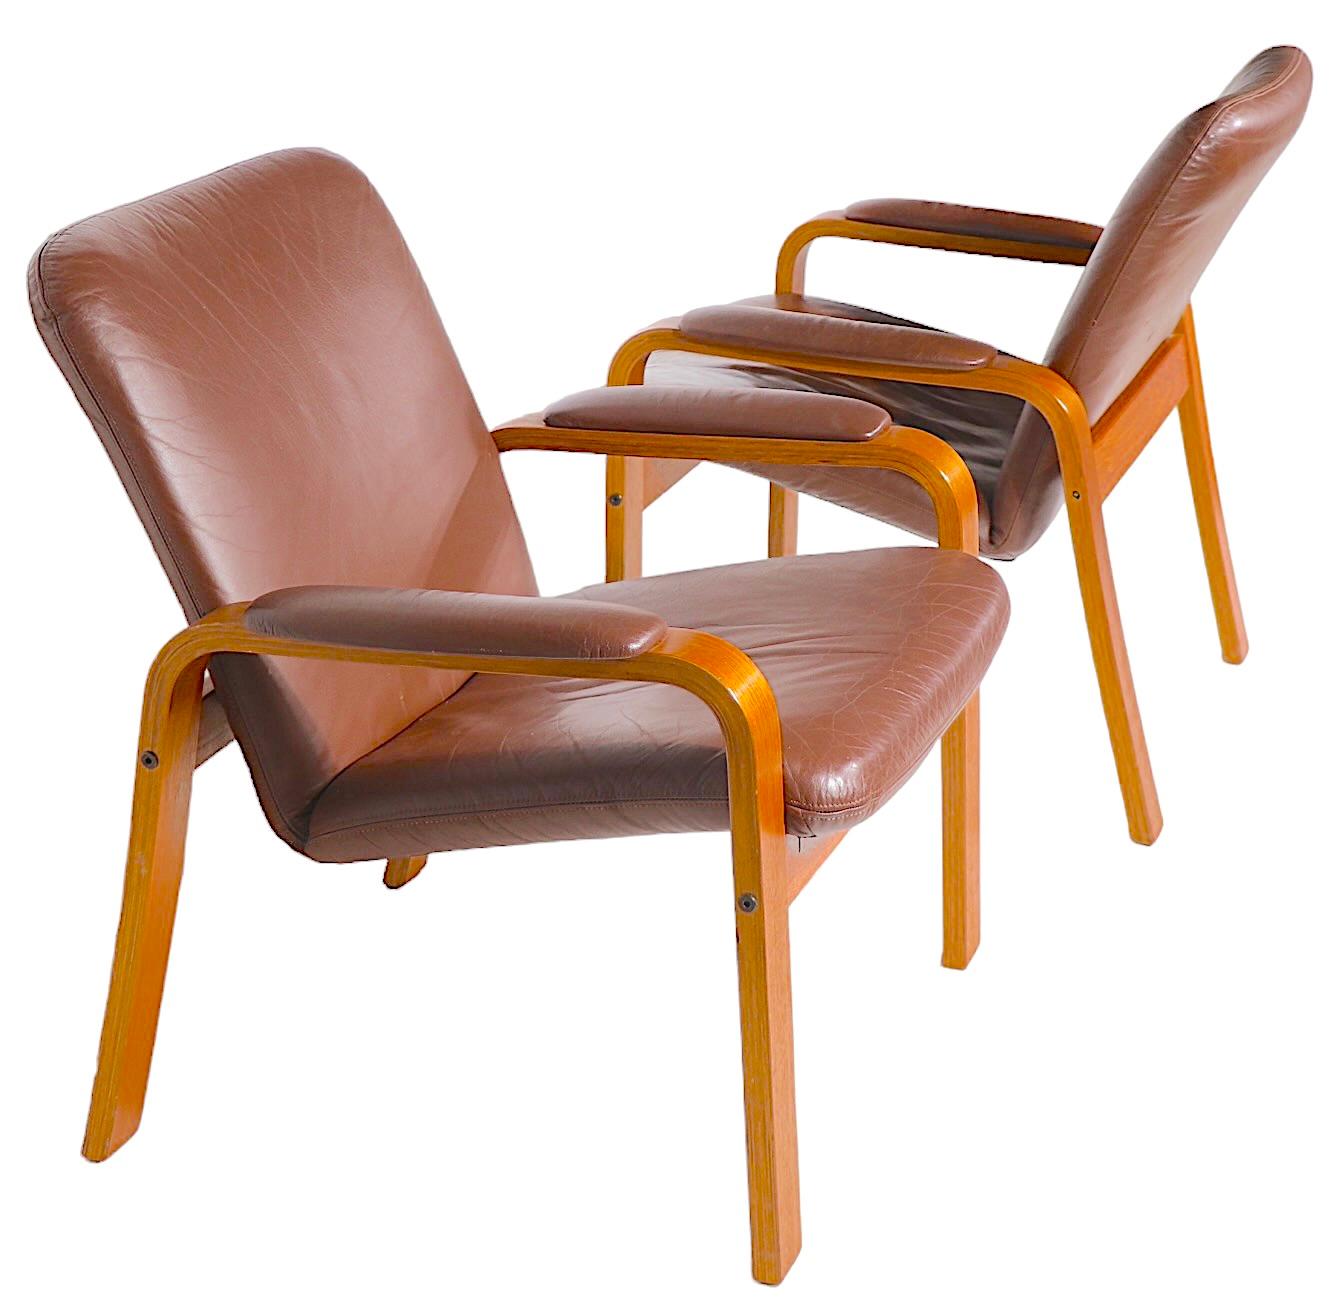 Pr. Scandinavian Mid Century Modern Lounge Arm Chairs Made in Norway by Ekorness For Sale 2